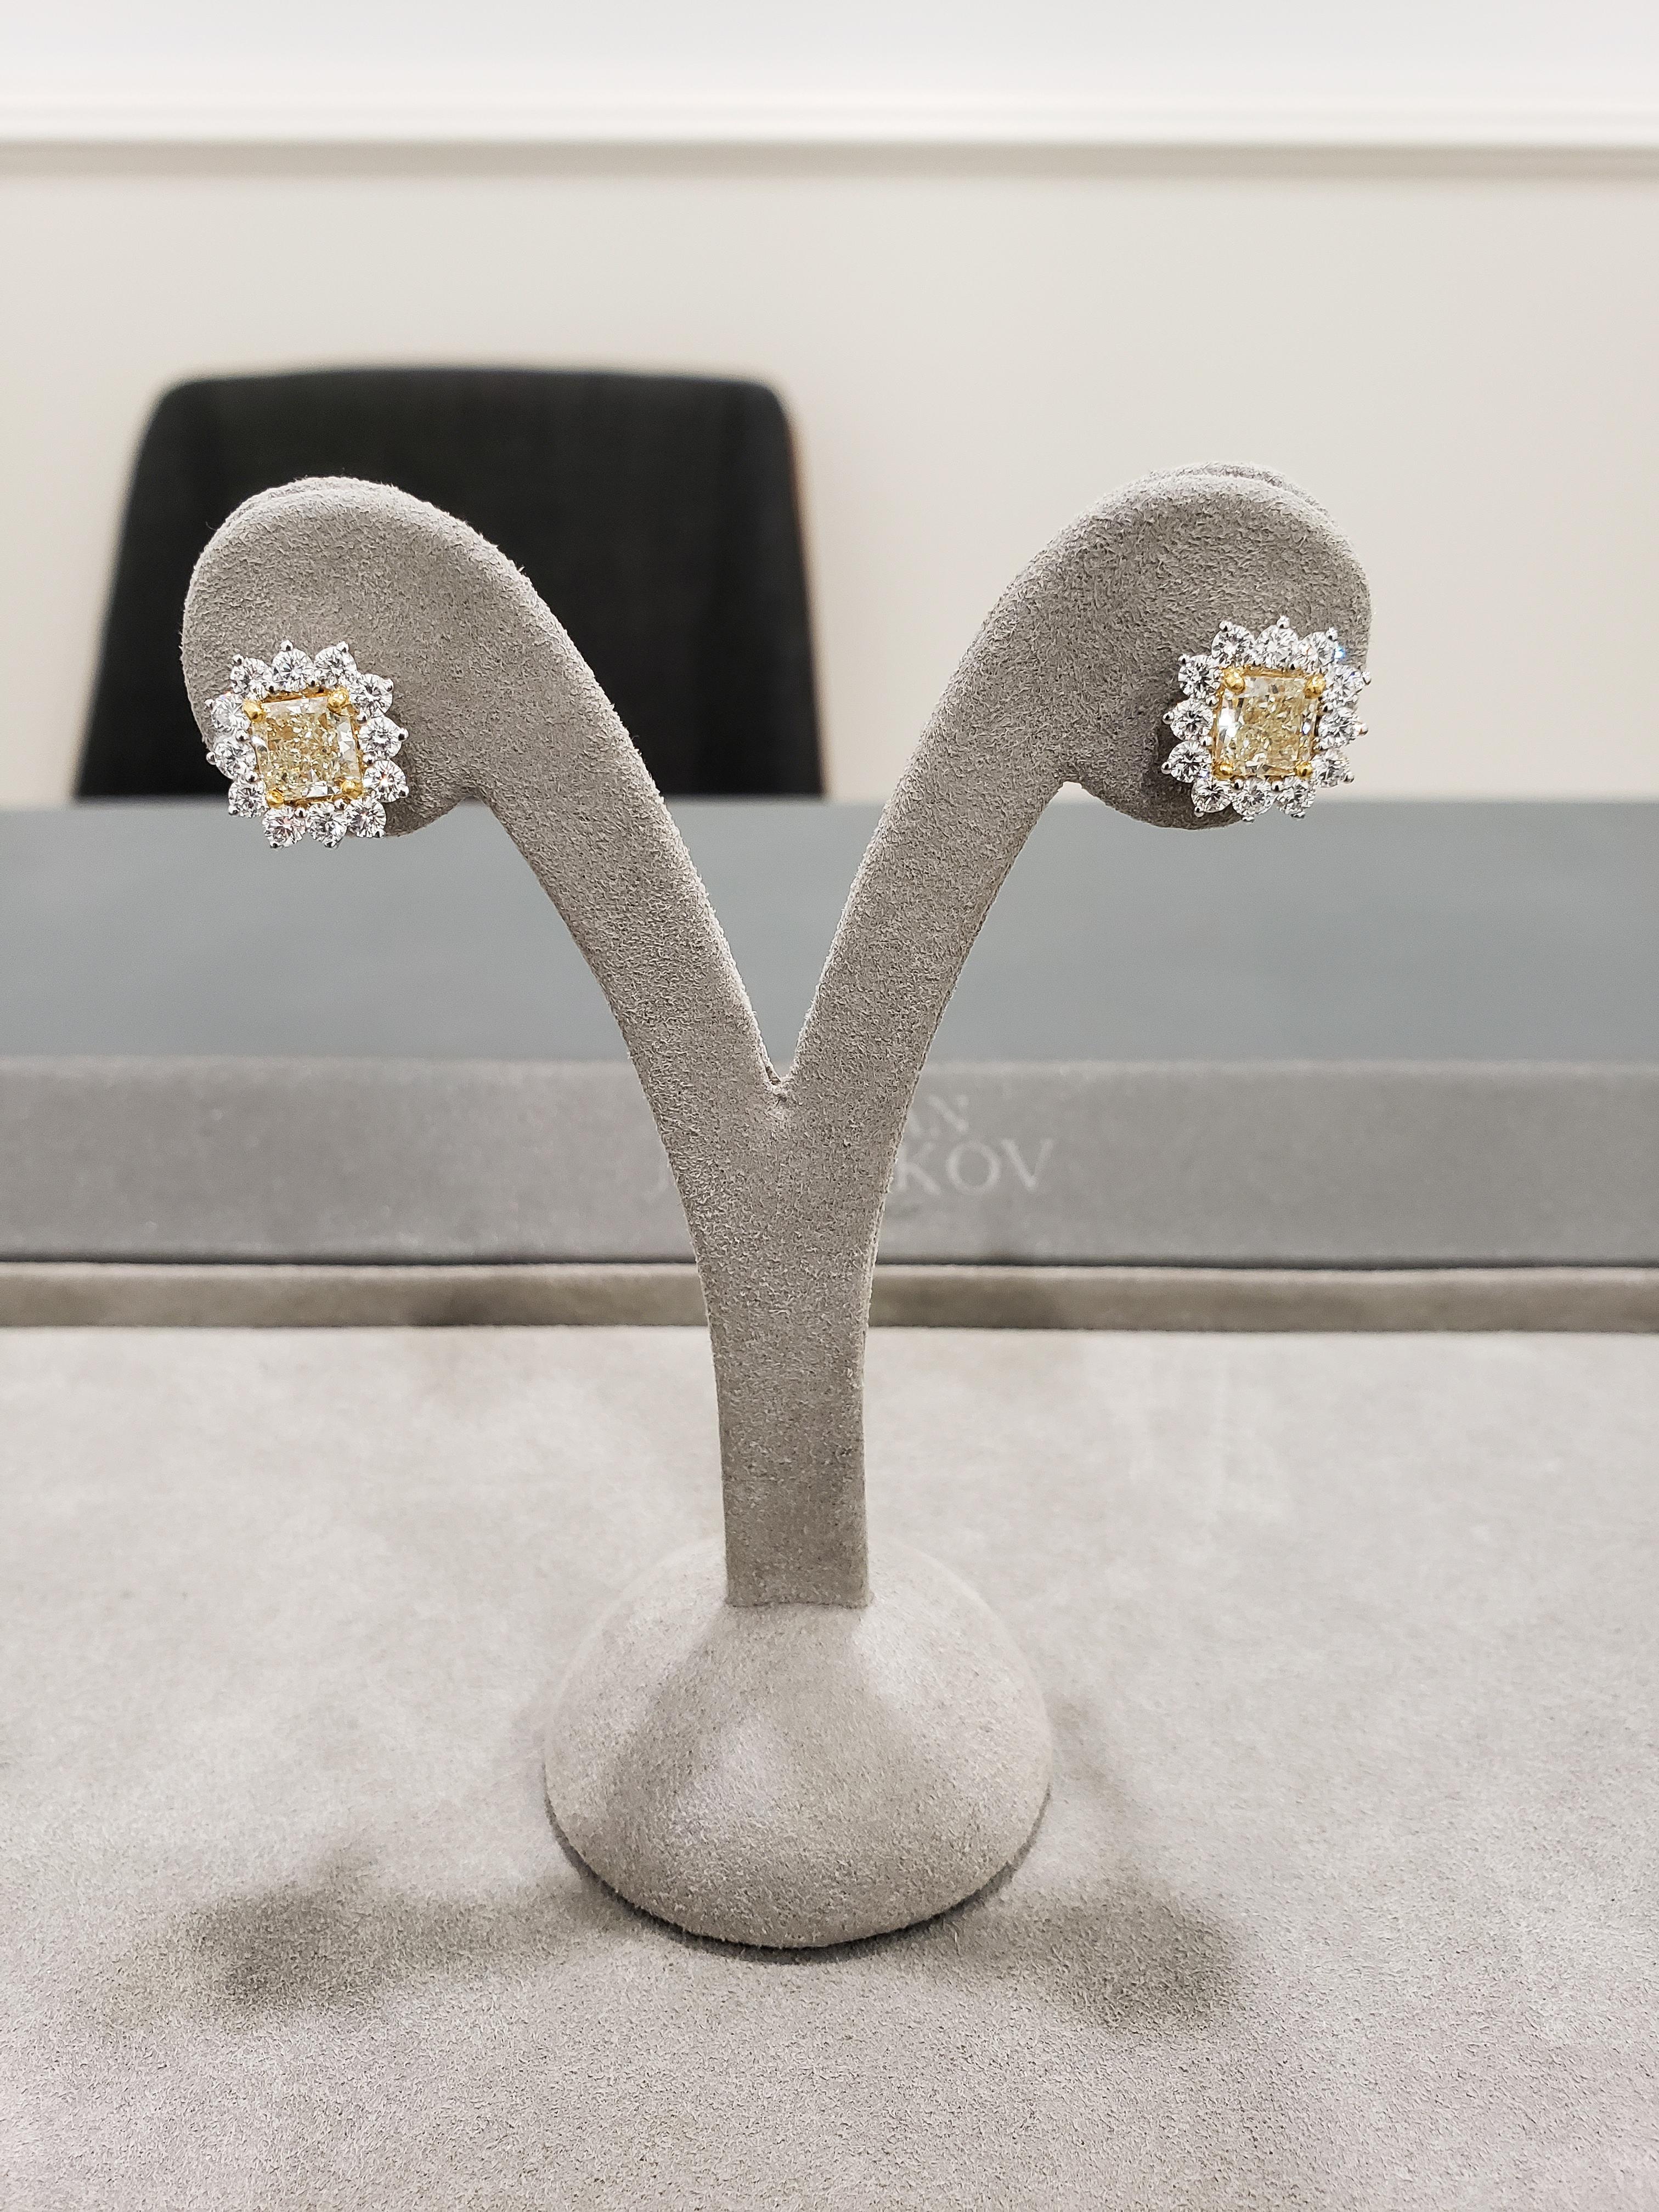 Showcases radiant cut yellow diamonds weighing 2.26 carats total, surrounded by a halo of round brilliant diamonds weighing 1.58 carats total. Set in a floral motif made in platinum.

